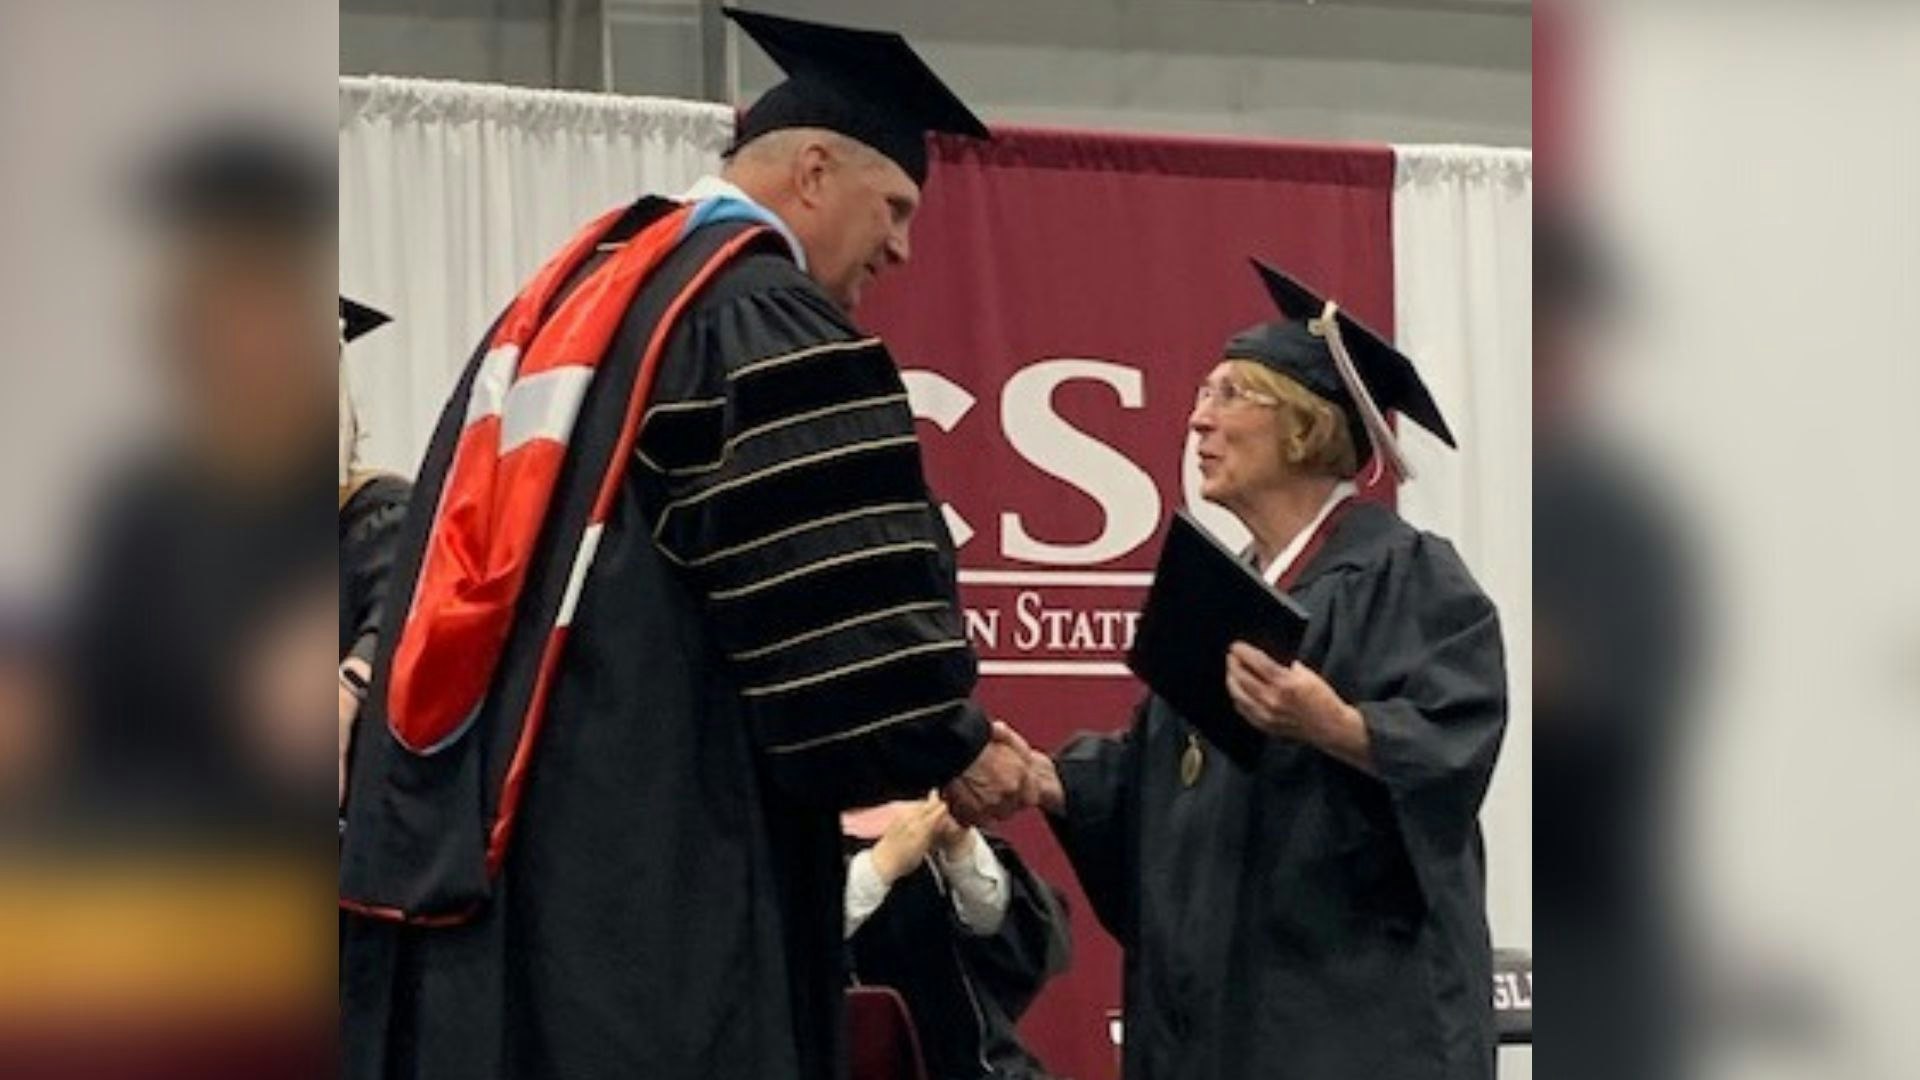 Doris "Mickey" Douglas receives her bachelor's degree from Chadron State College.